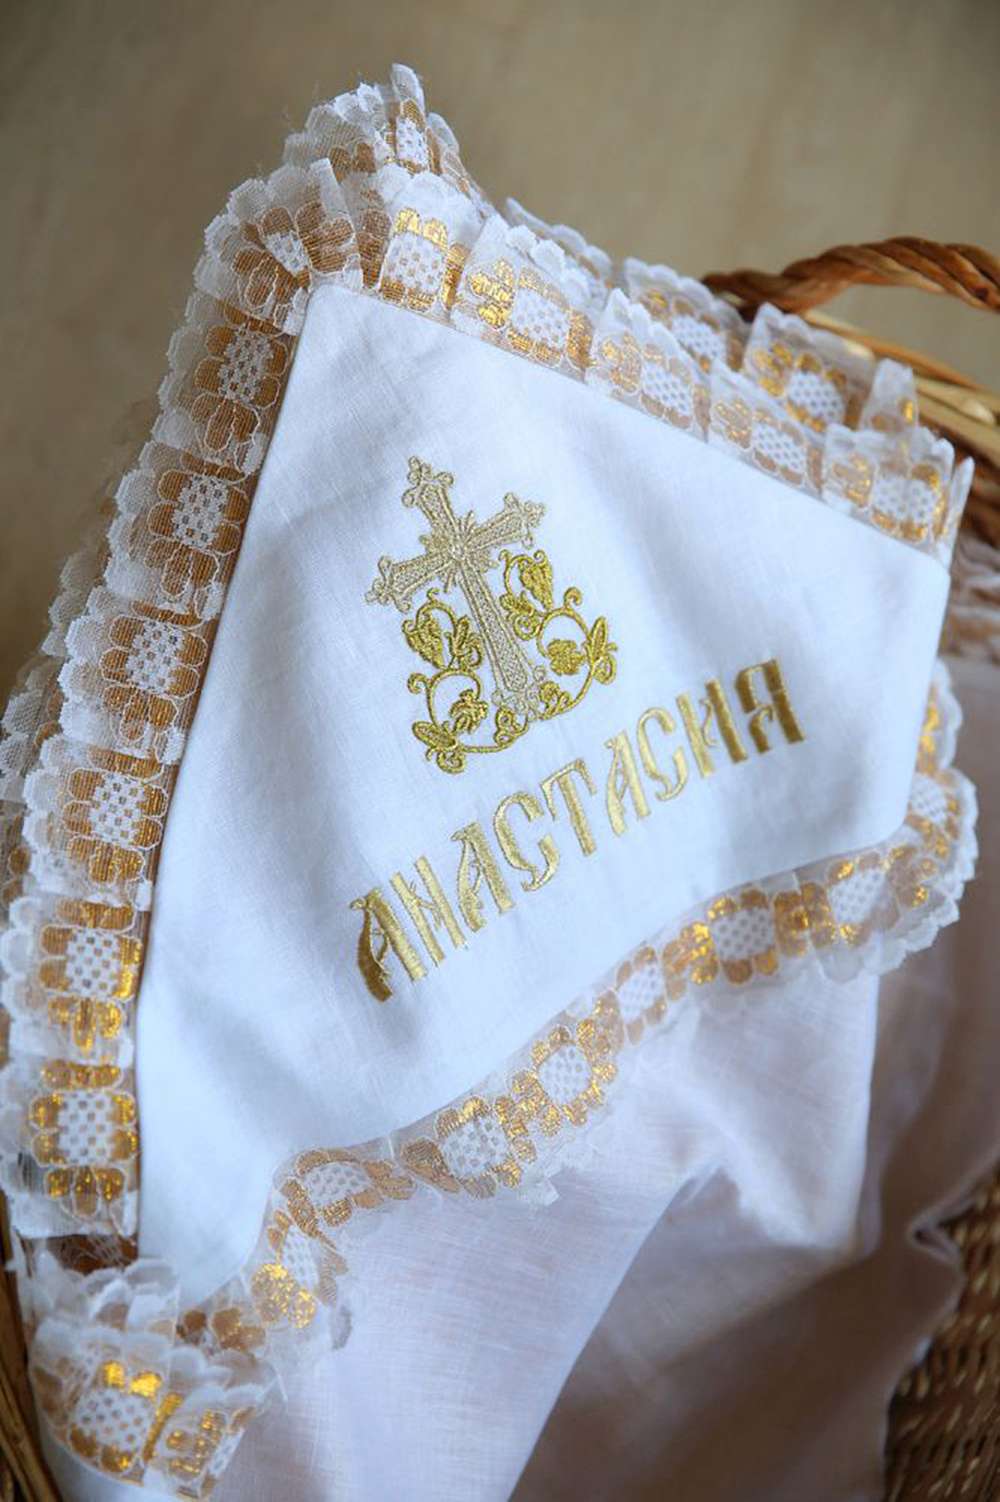 Baptism, christening blanket with embroidered name